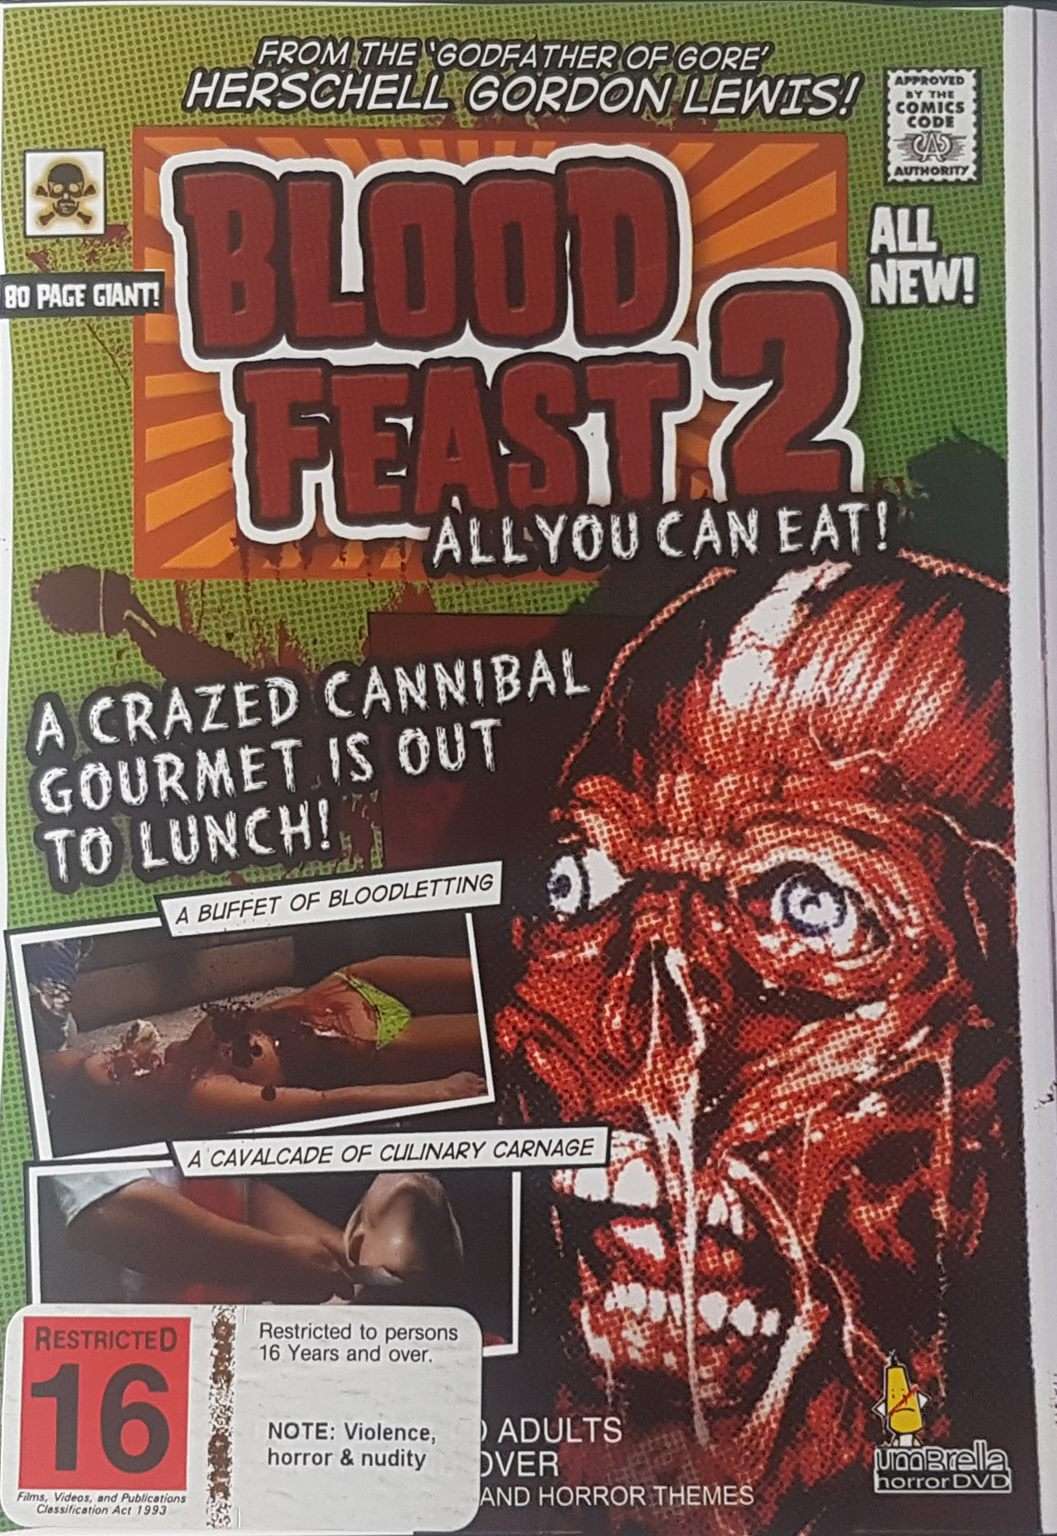 Blood Feast 2: All You Can Eat!